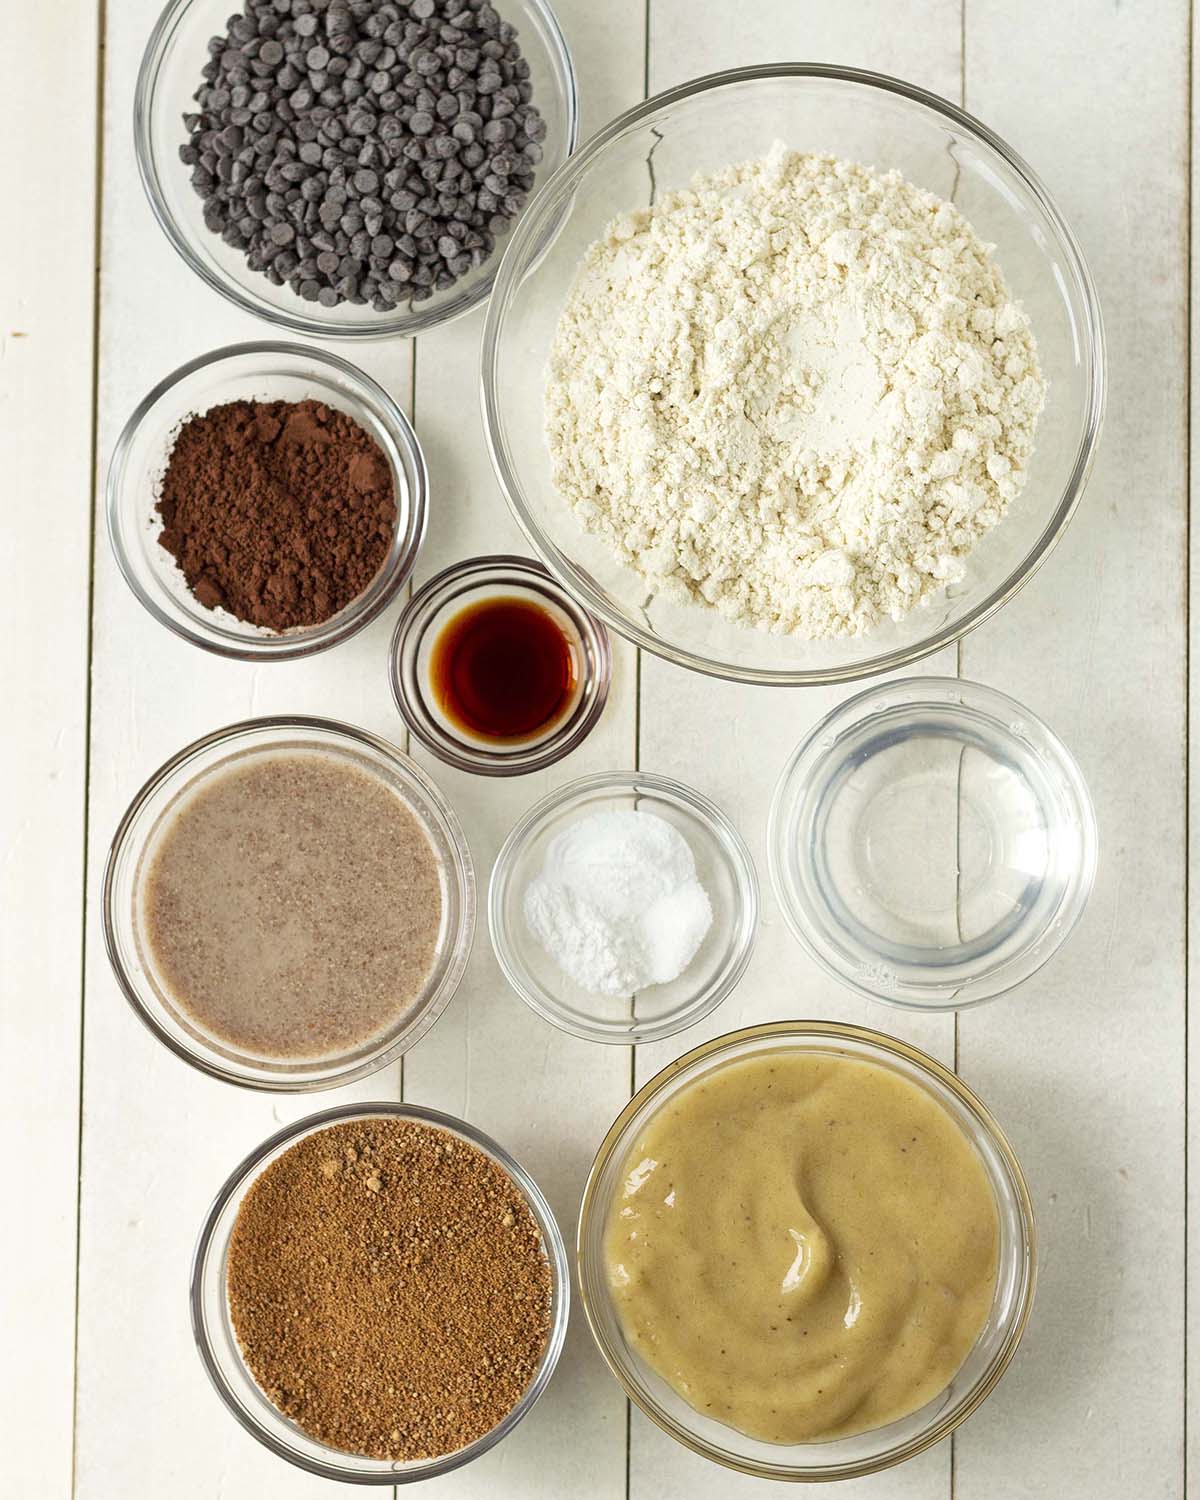 Overhead shot showing ingredients needed to make gluten free chocolate banana muffins, ingredients are in separate bowls.